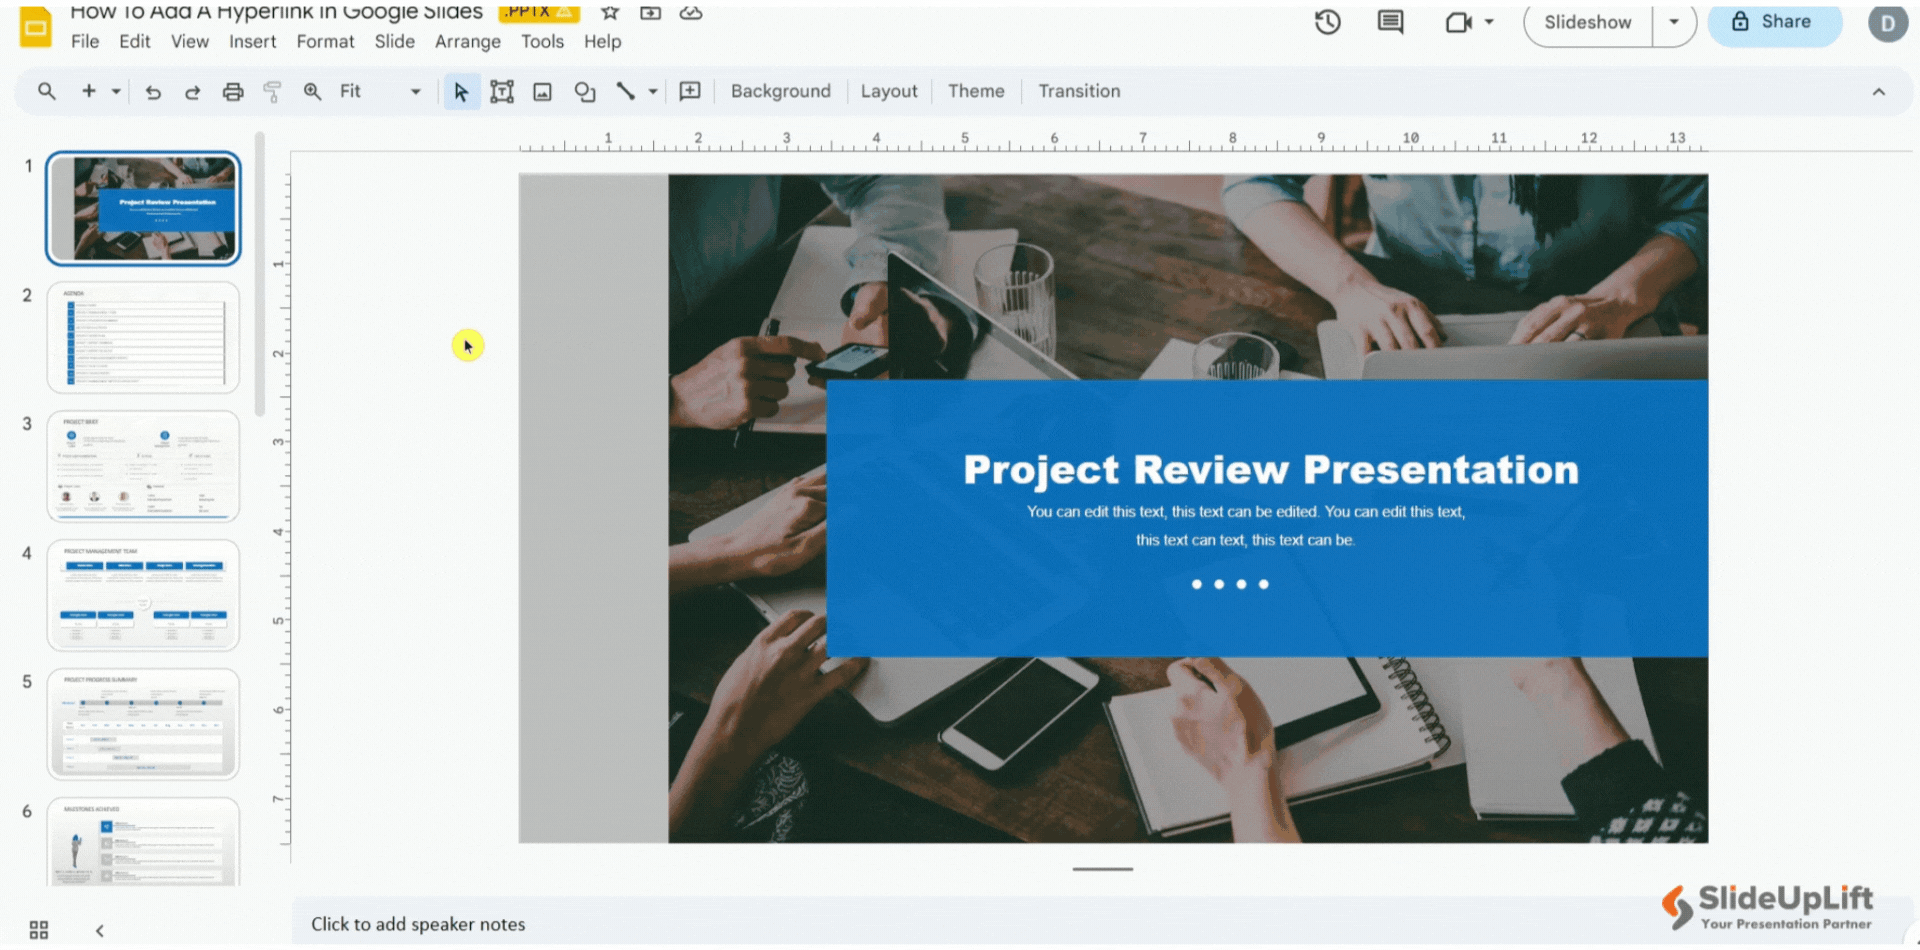 How to Link to a Specific Slide in Google Slides